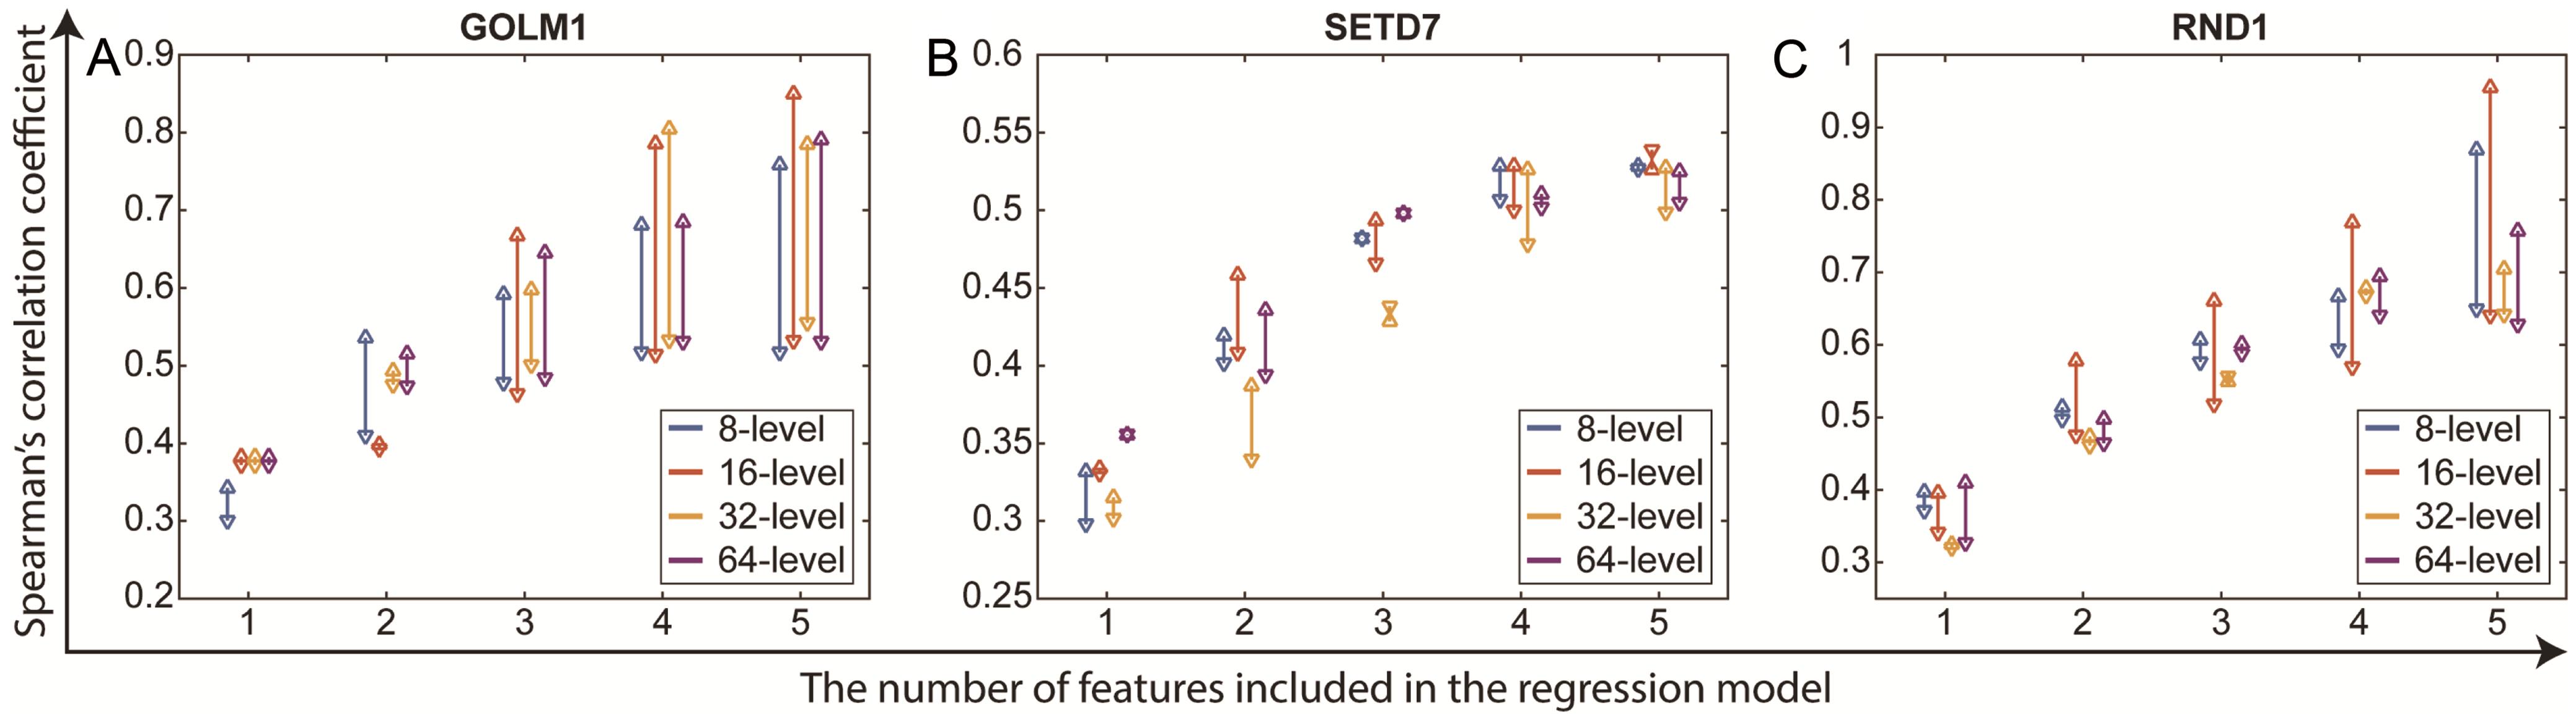 Behavior of the generated multivariable regression model to predict gene expression signatures.